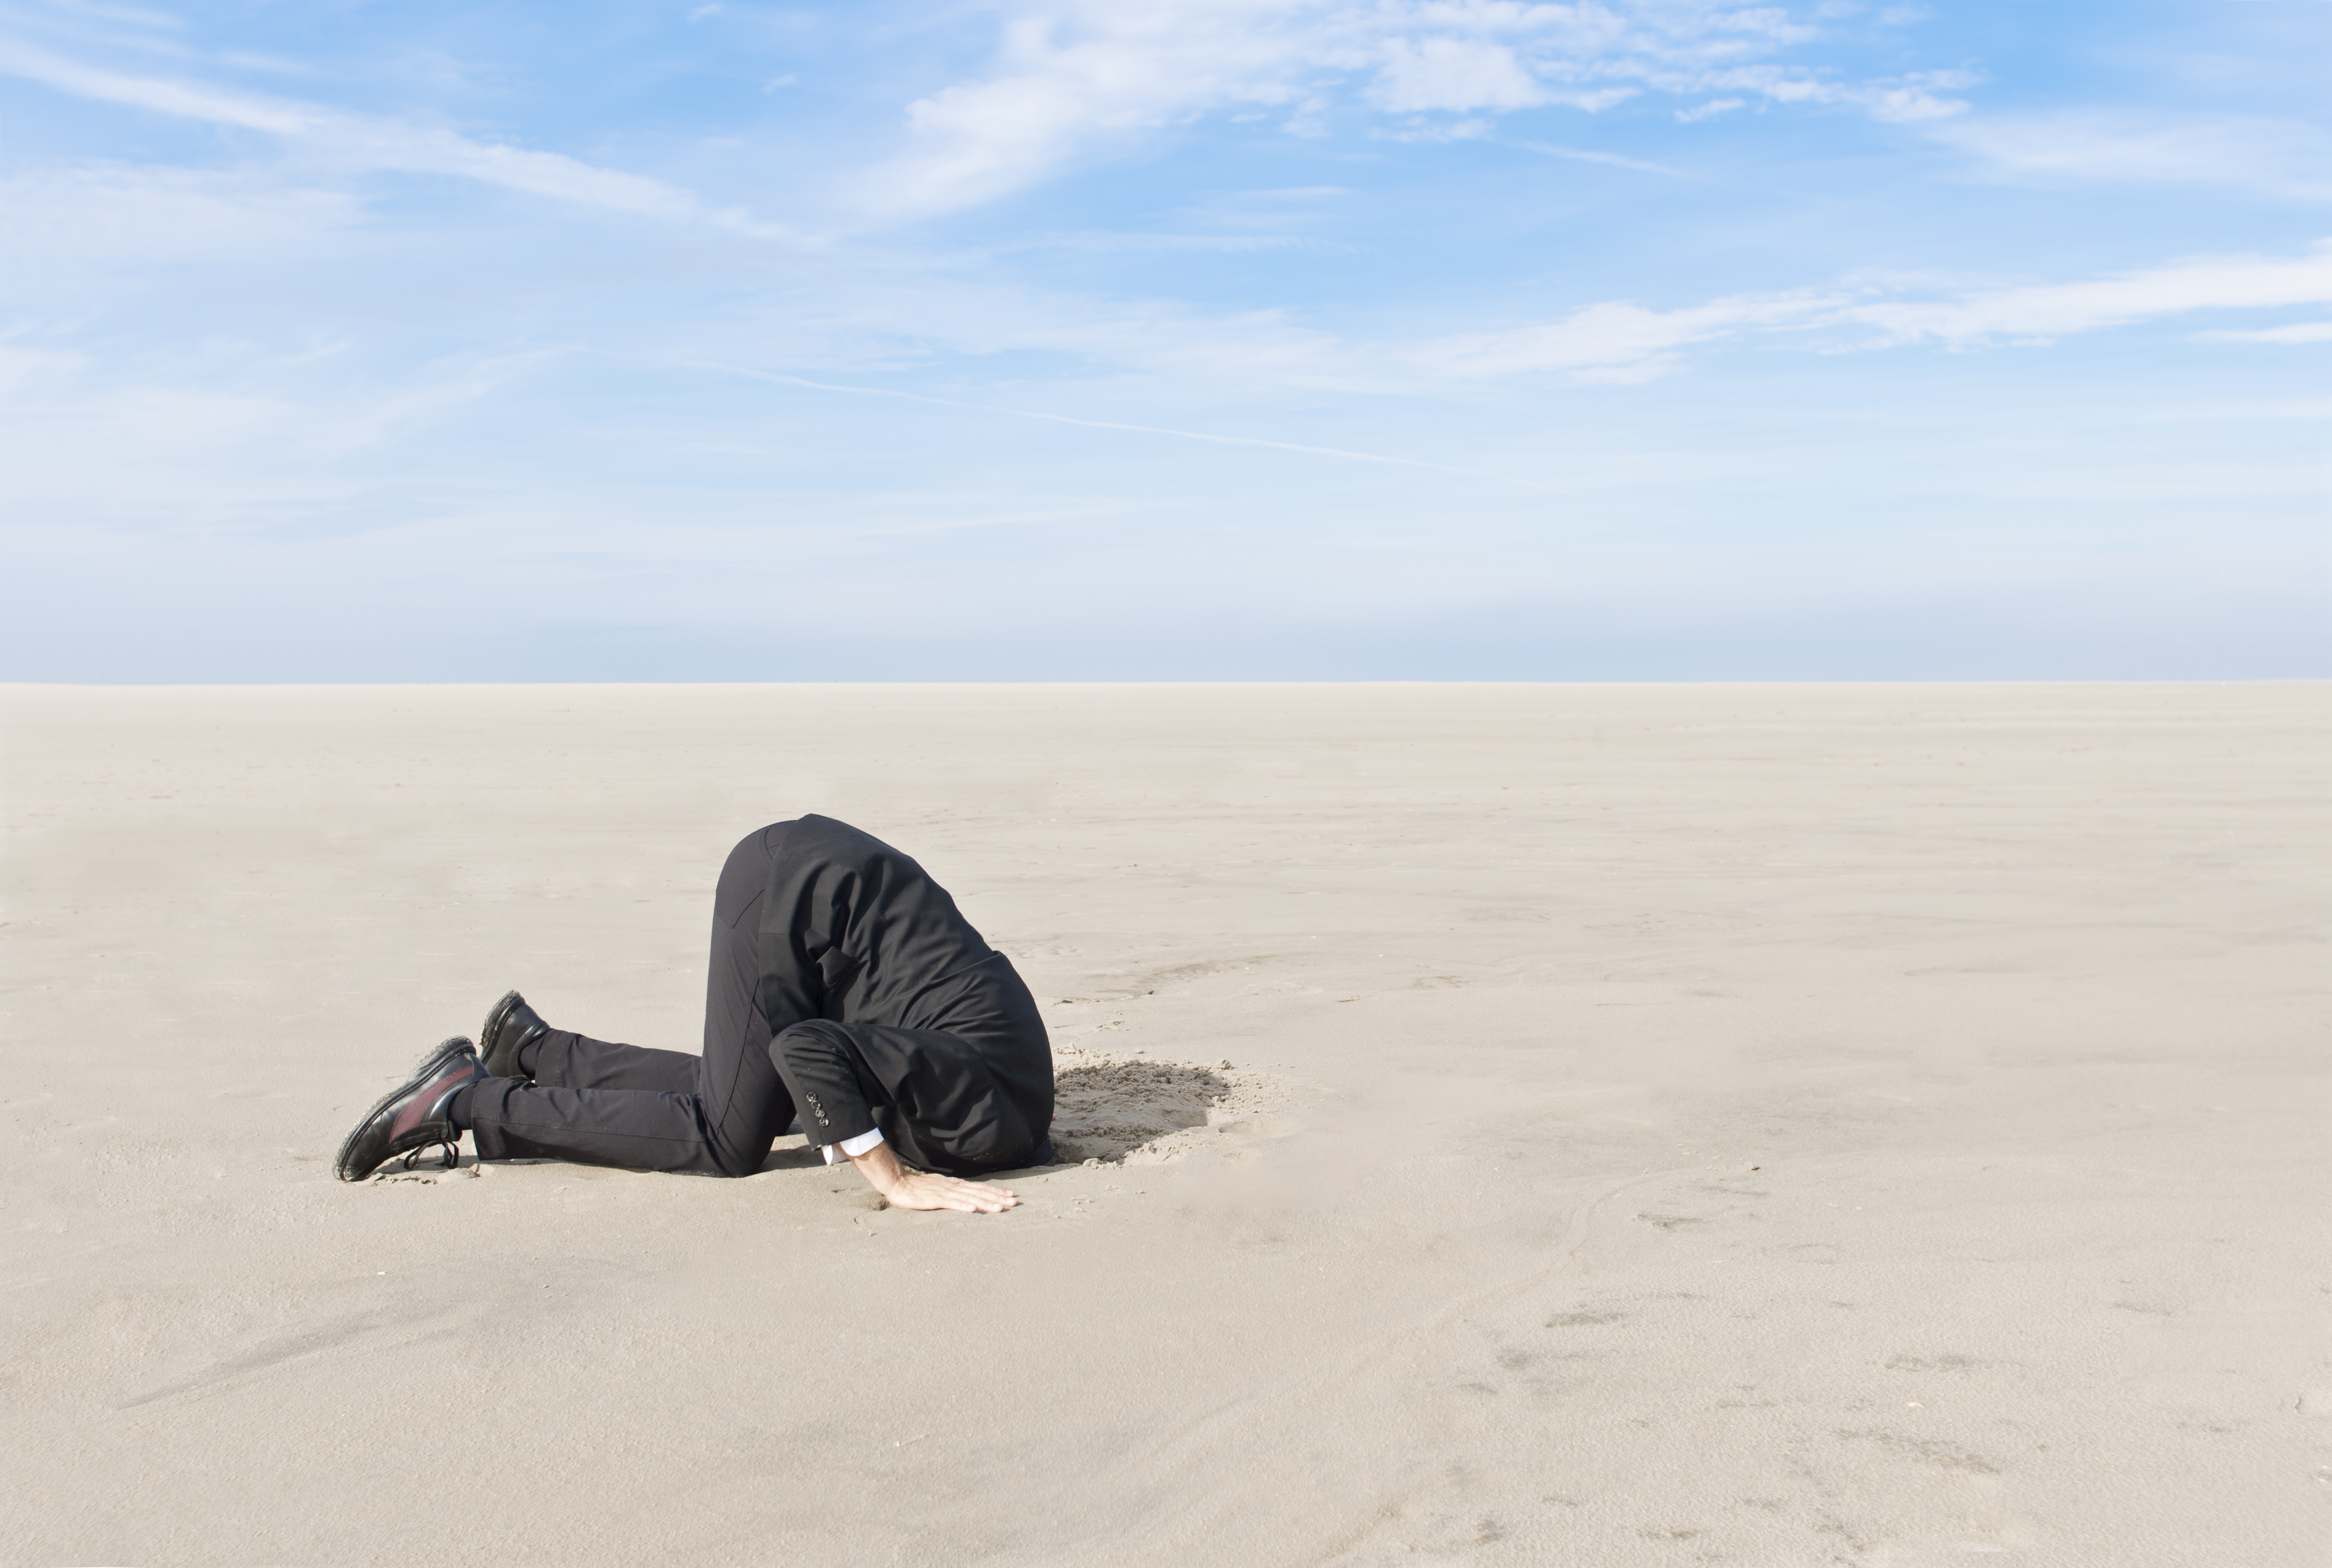 "A business man, hiding his head in the sand. XXL size image."